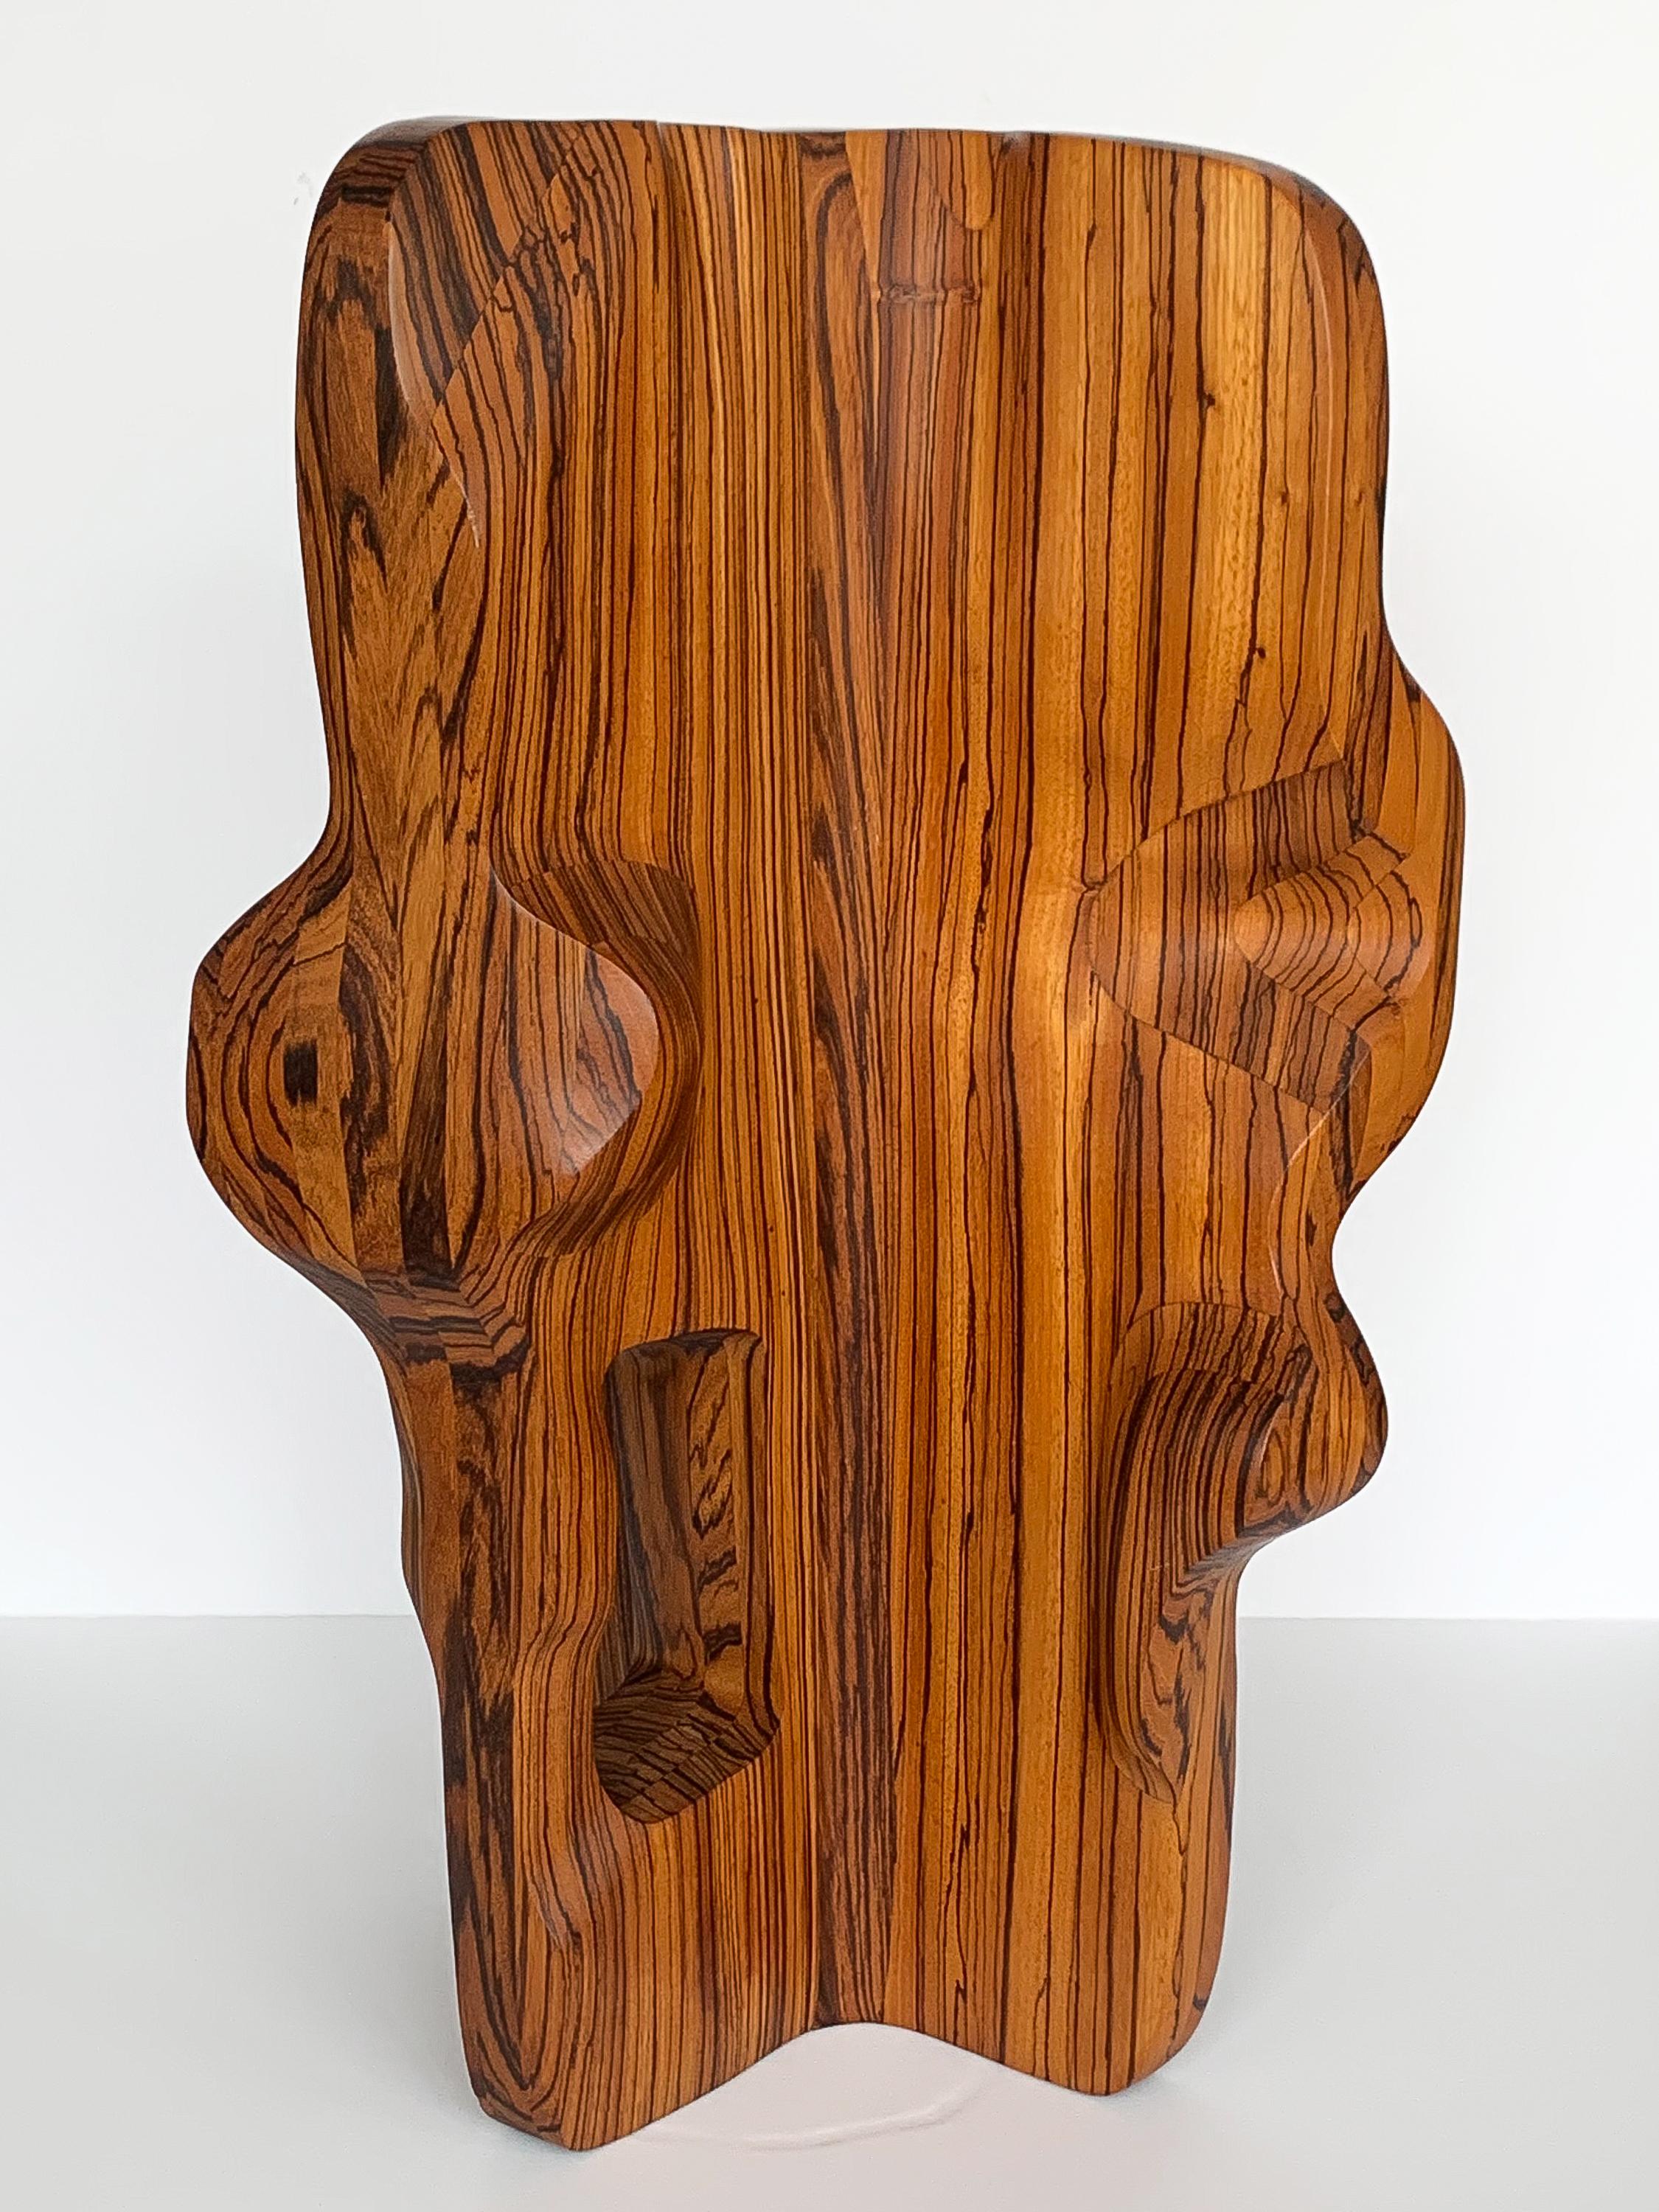 American Monumental Abstract Carved Zebrawood Sculpture by John Campbell